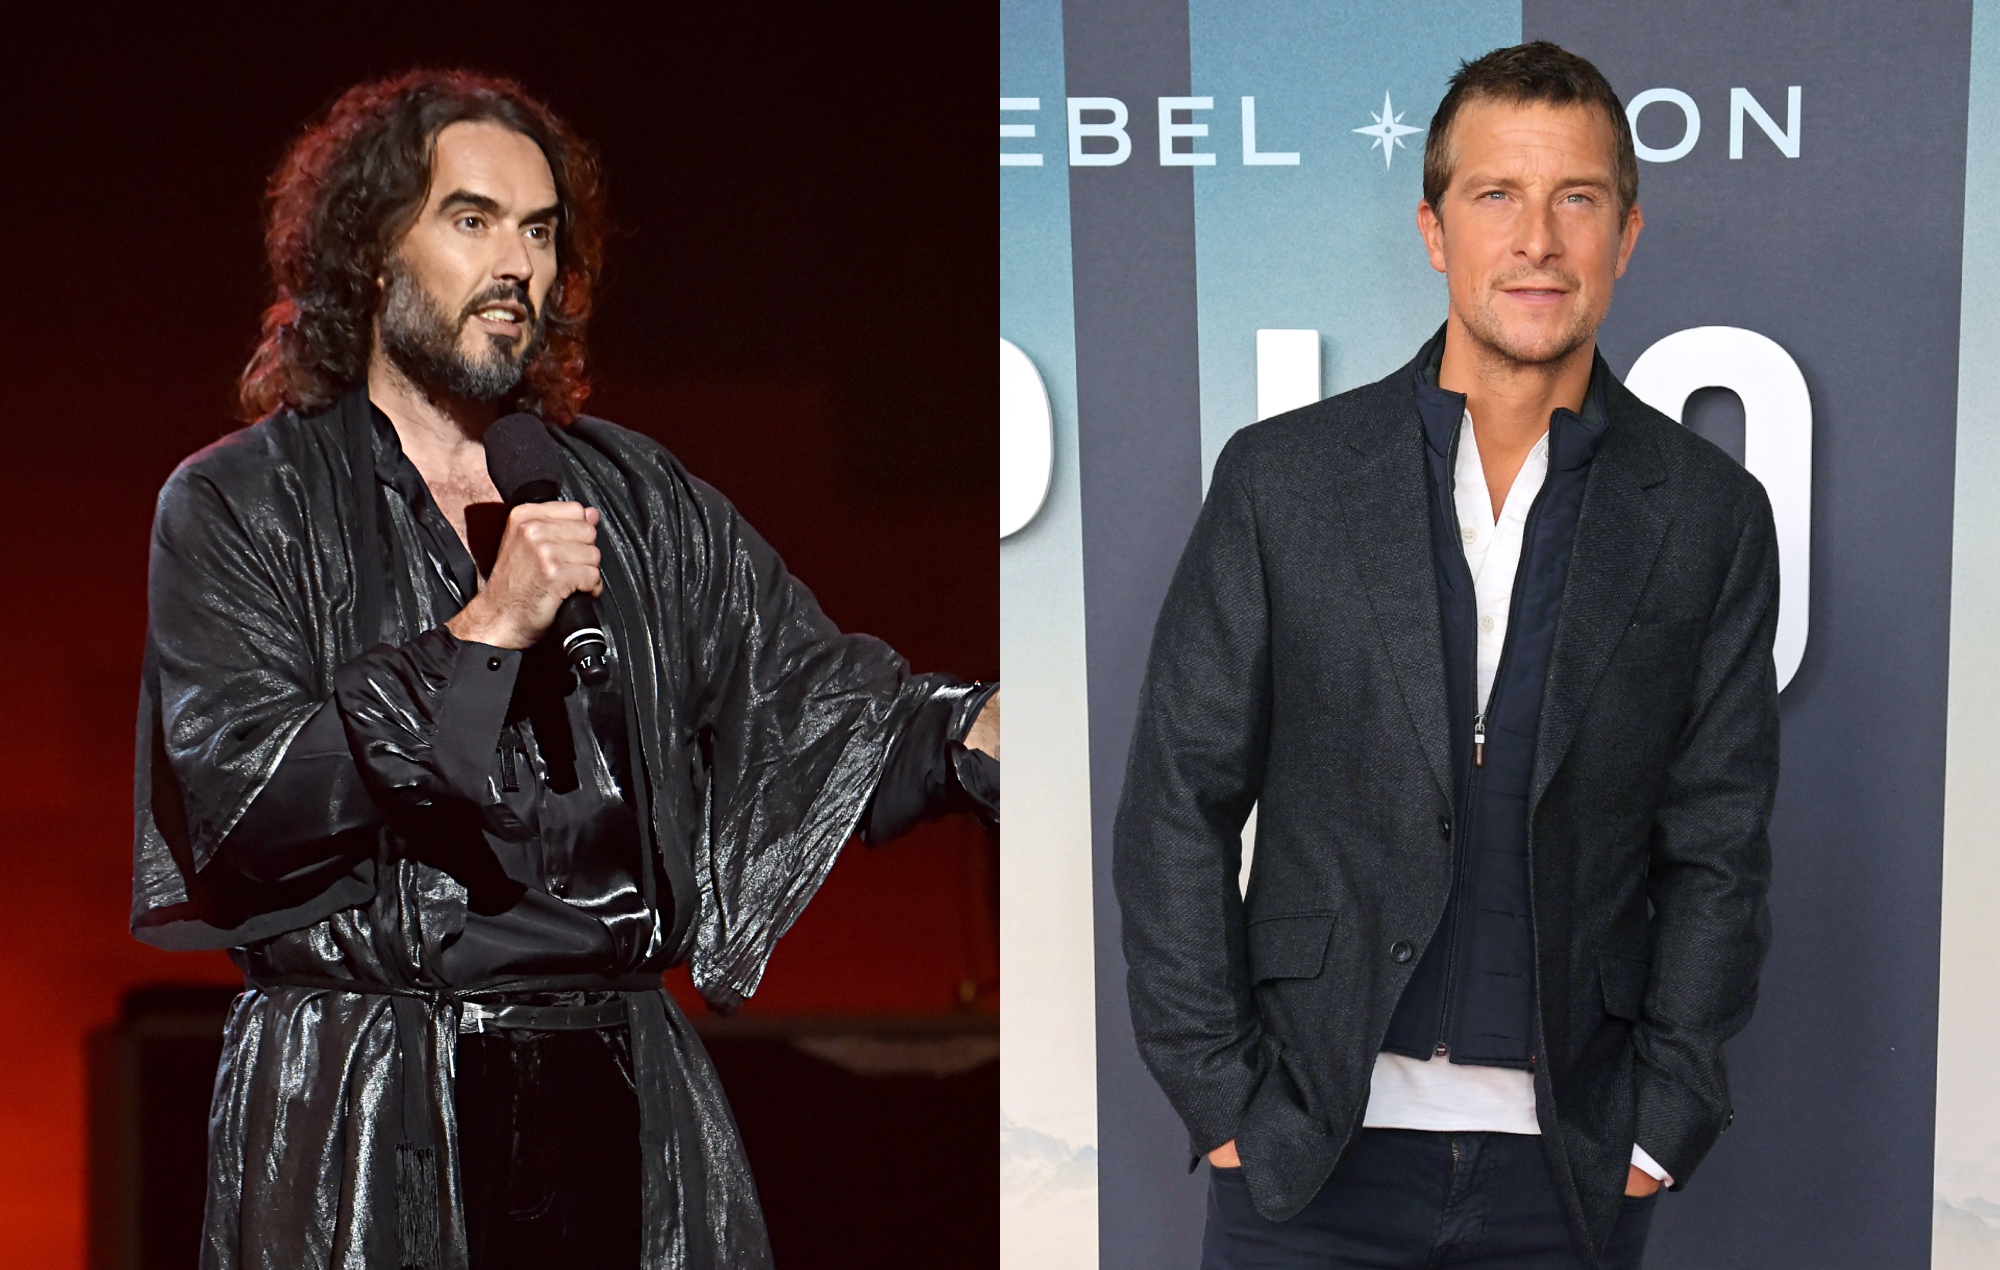 Russell Brand embraces Bear Grylls as he shares photo from River Thames baptism